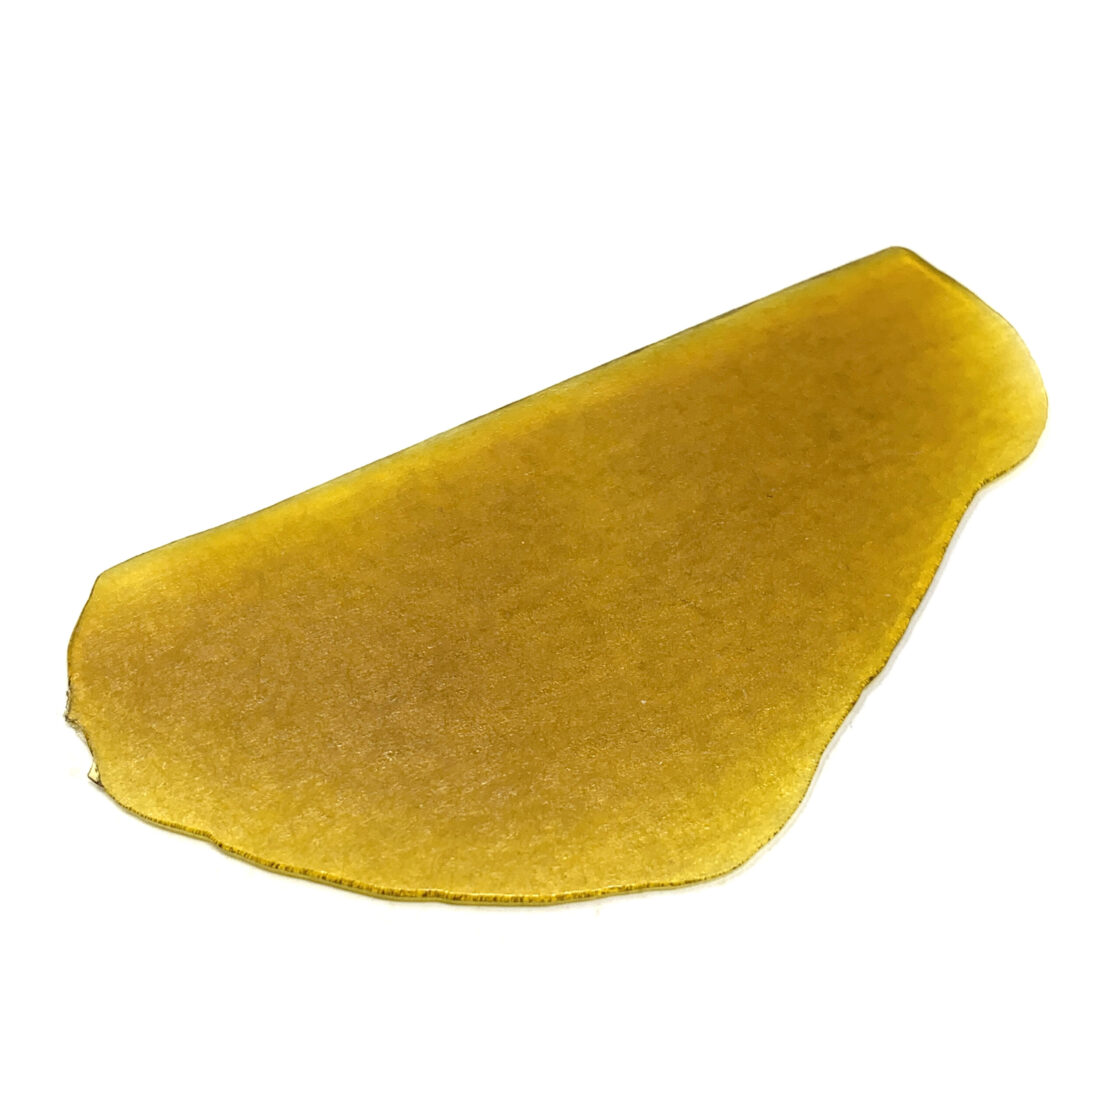 Enigma Extracts – Pre 98 Shatter